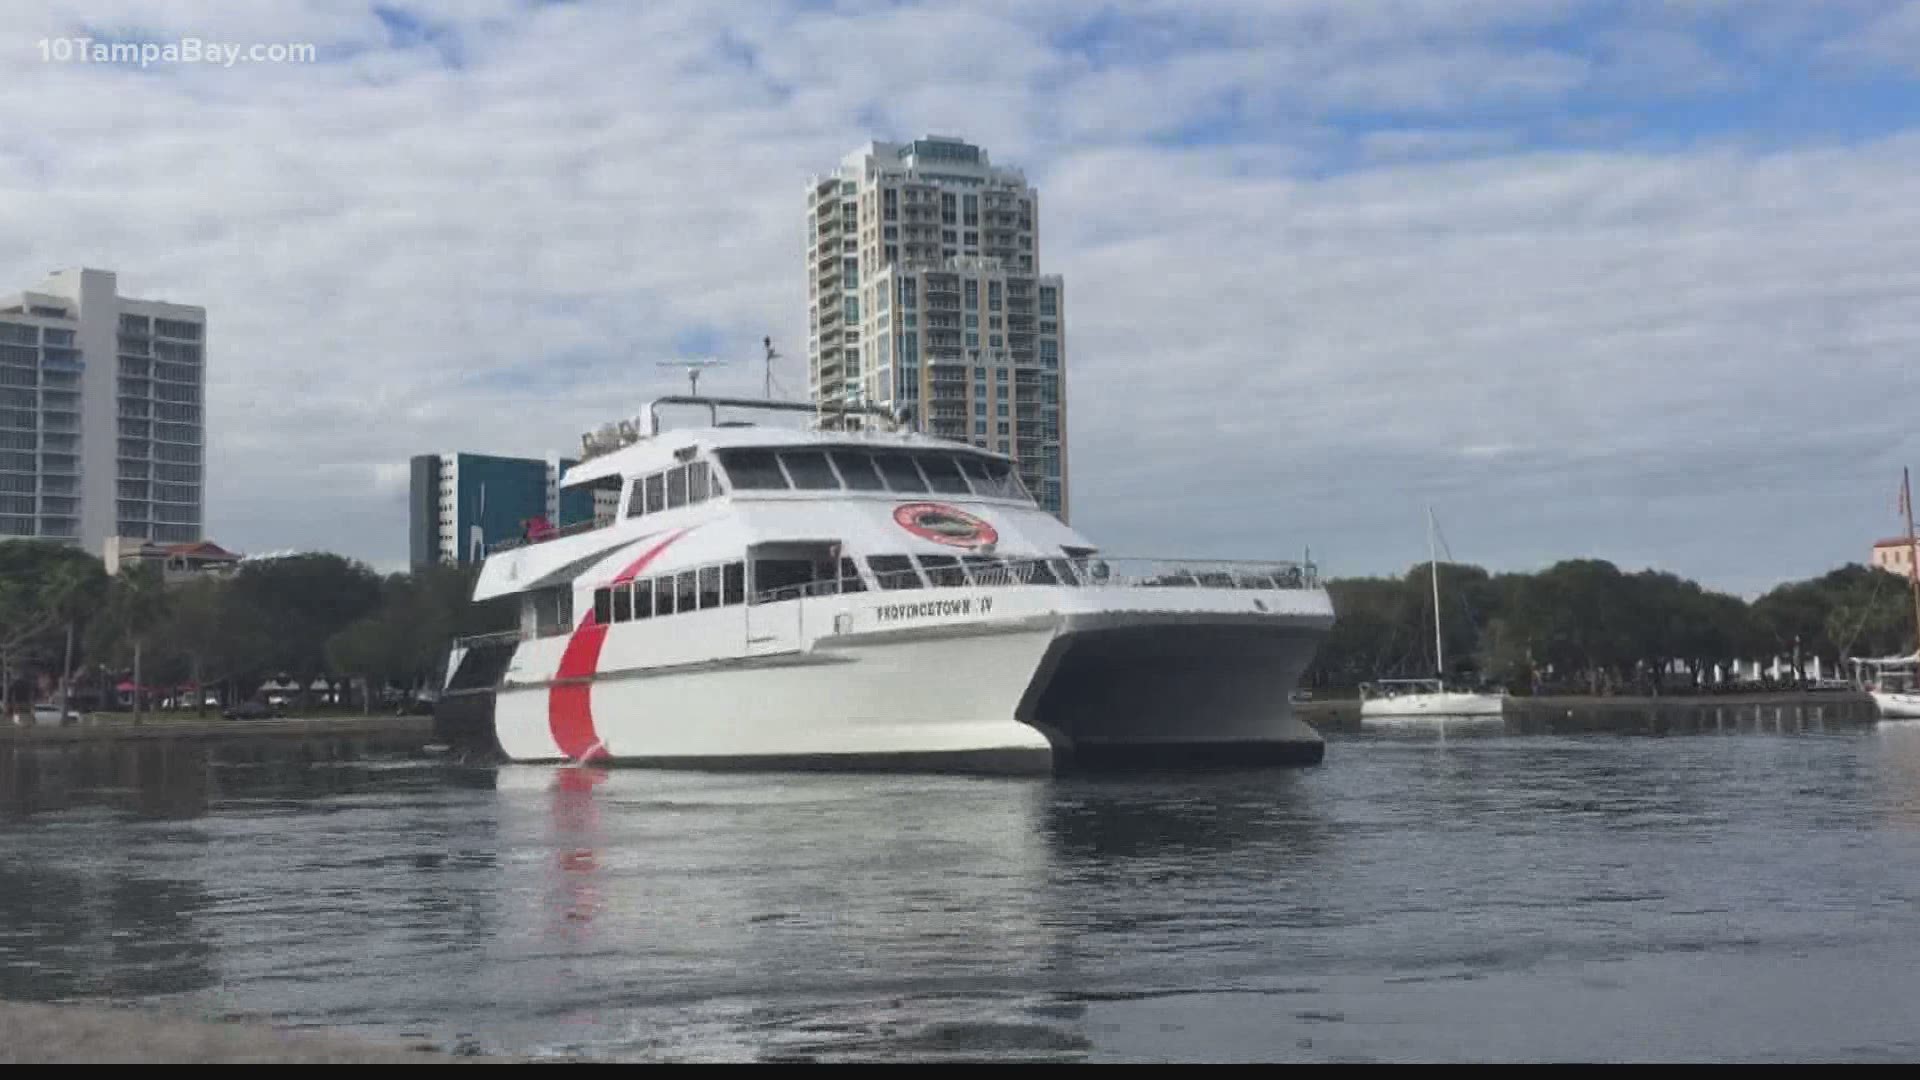 The Tampa docking location is moving in preparation for Super Bowl LV.